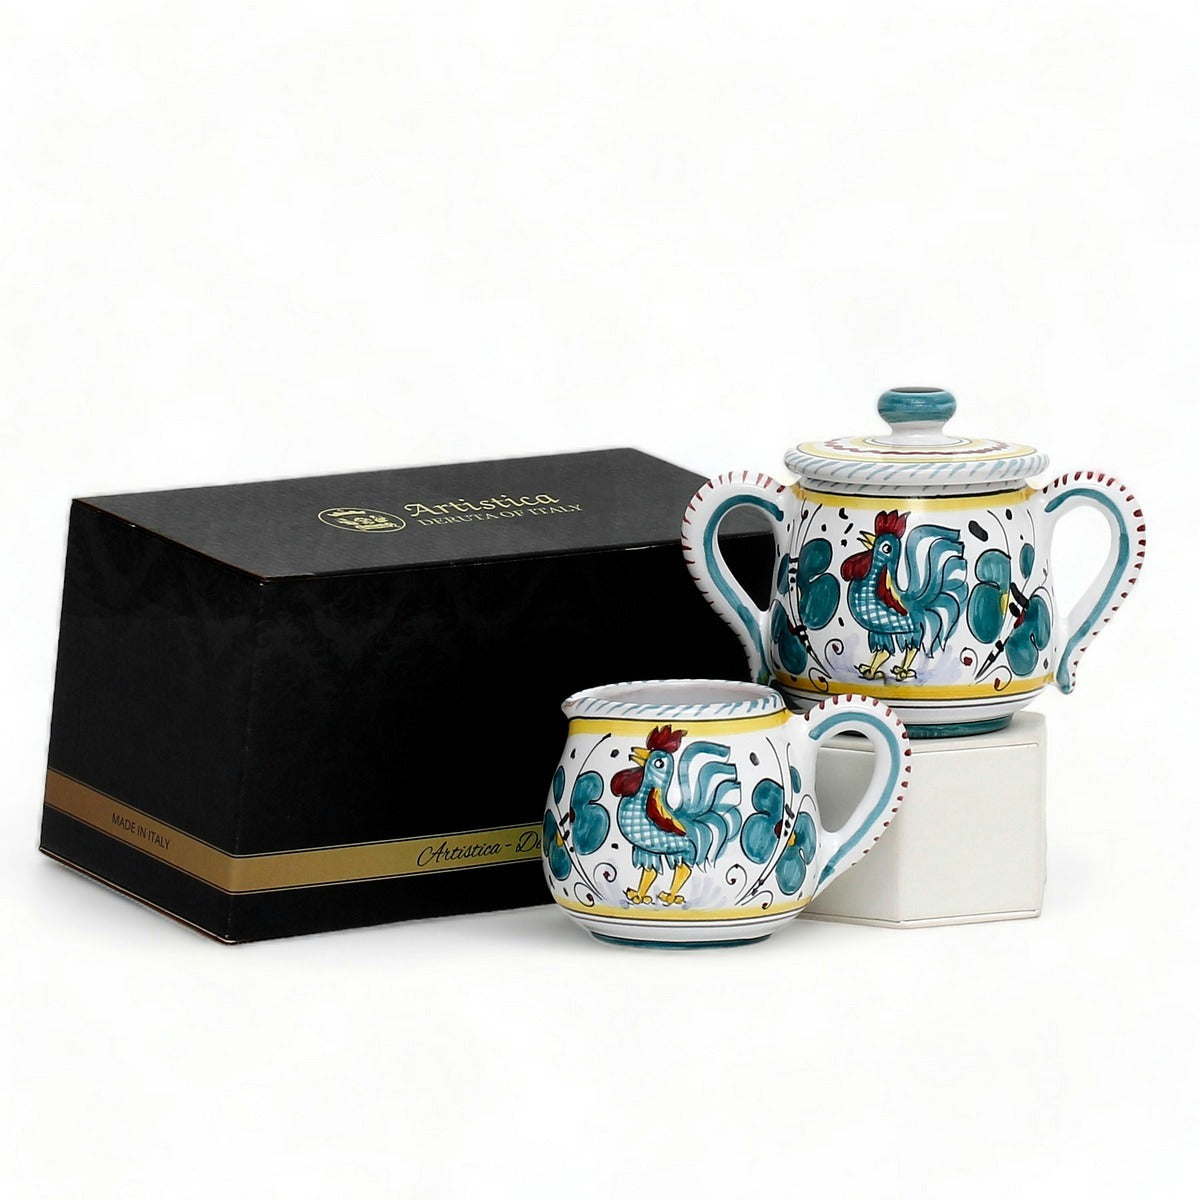 GIFT BOX: With authentic Deruta hand painted ceramic - Cream & Sugar Set Green Rooster design